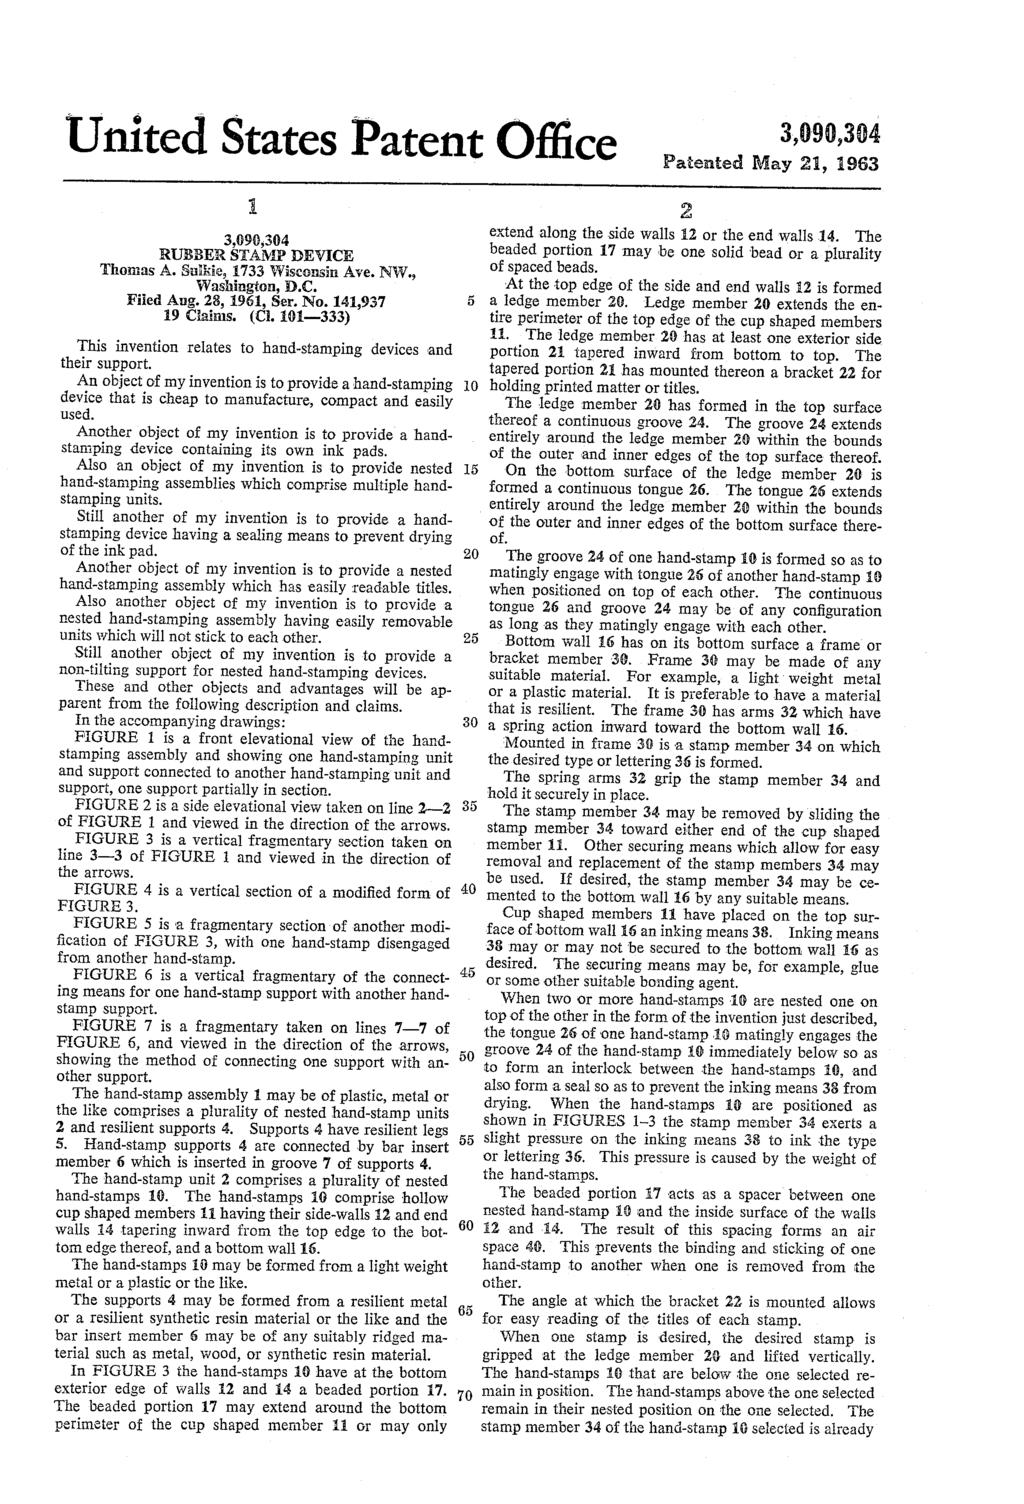 United States Patent Office 3,090,4 Patented May 2, 1963 3,099,4 RUBBER SAMP DEVICE Thomas A. Sukie, 1733 Wisconsin Ave. N.W., Washington, D.C. Fied Aug. 28, 1961, Ser. No. 141,937 19 Caims. (C.